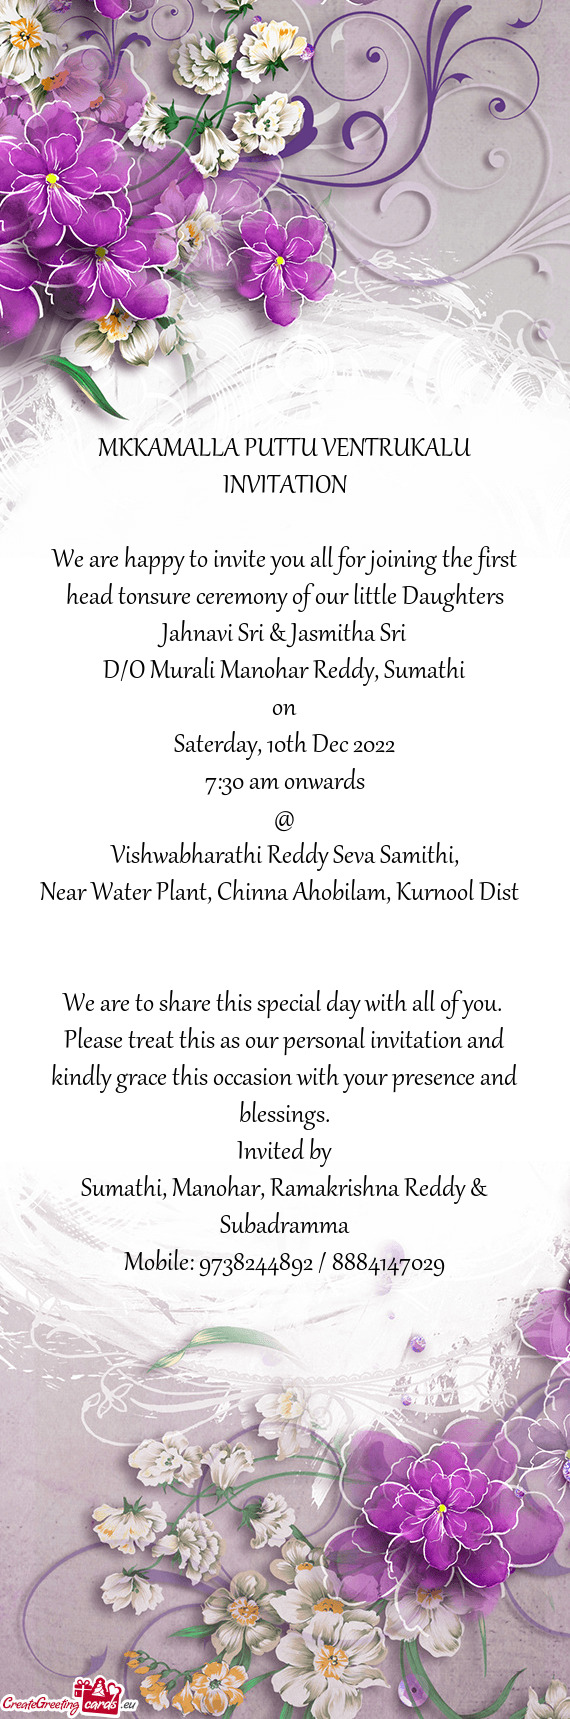 We are happy to invite you all for joining the first head tonsure ceremony of our little Daughters